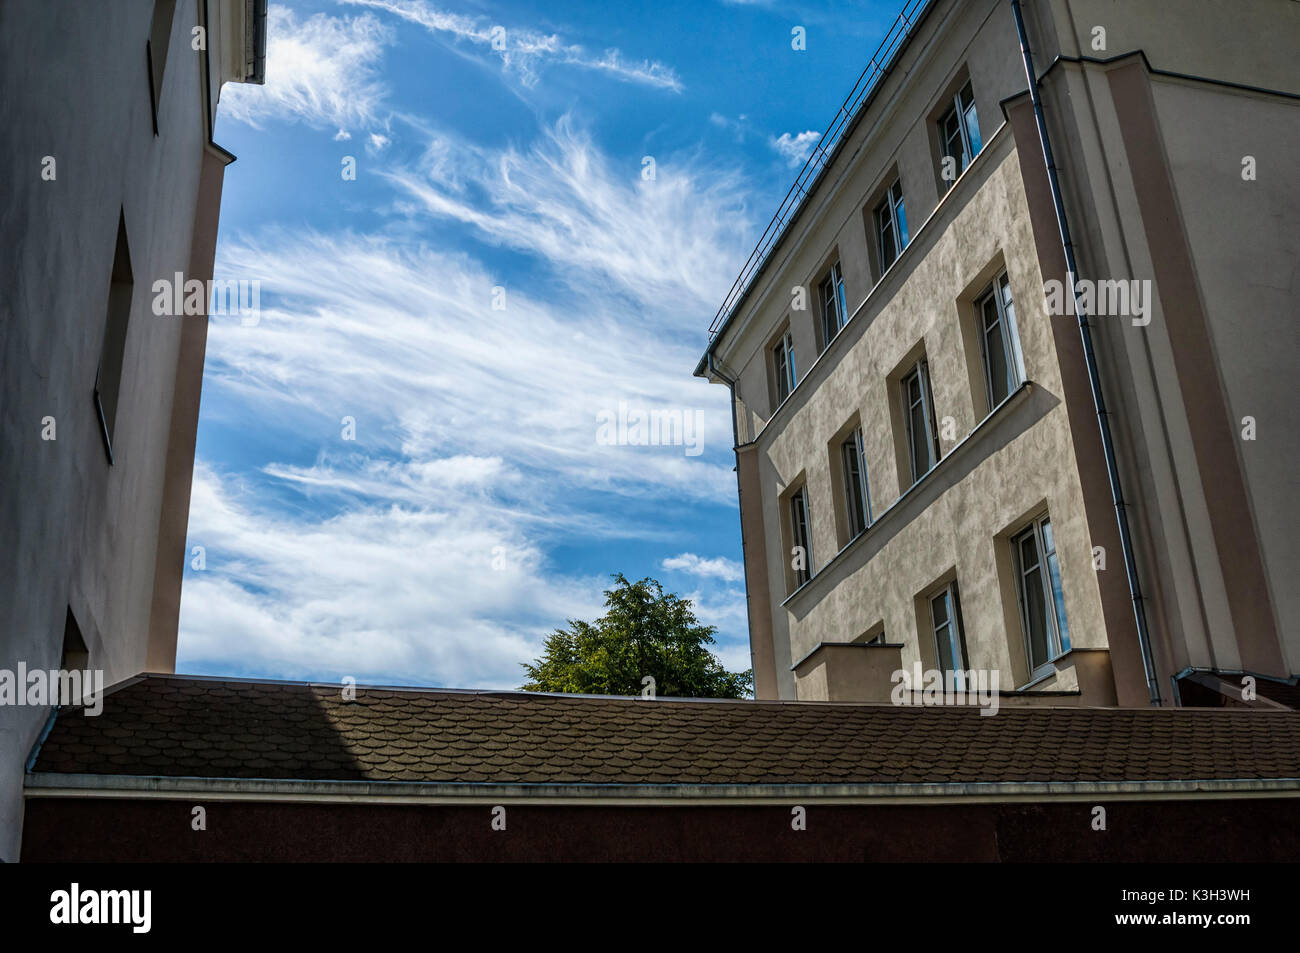 Geography, Lithuania, Klaipeda, Walls of the old town Stock Photo